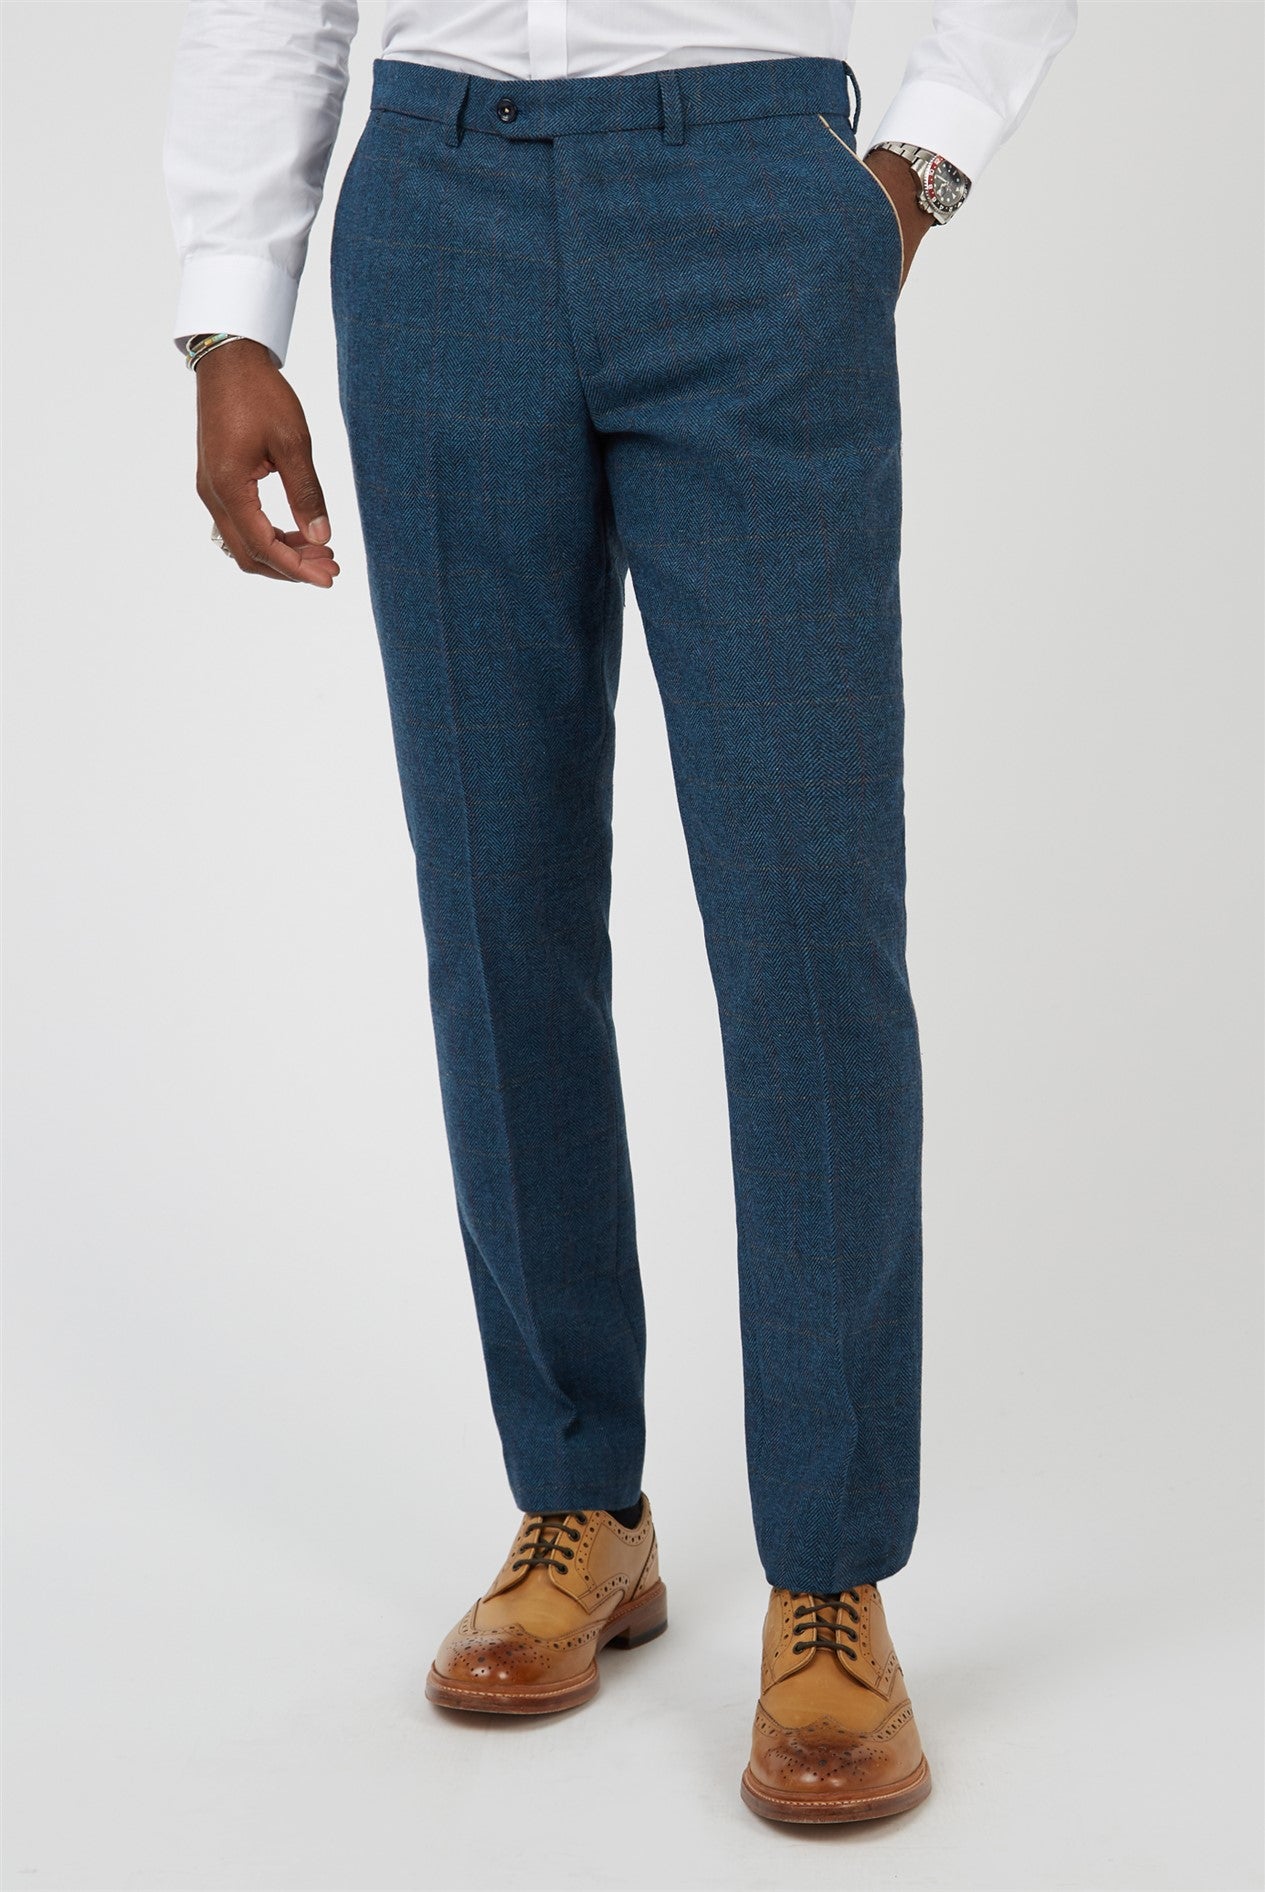 Marc Darcy Blue Check Two Piece Suit